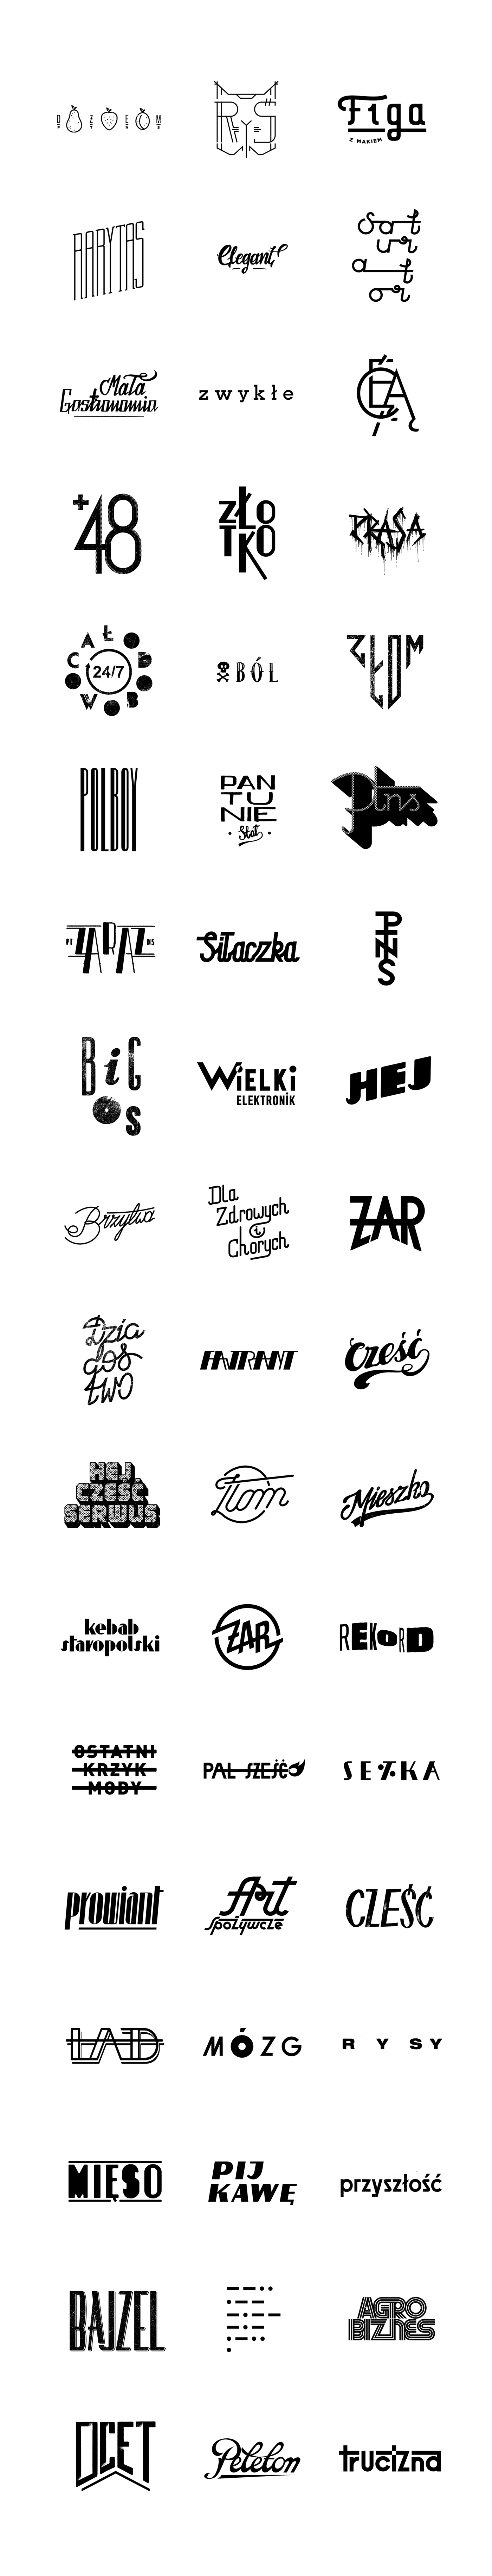 Custom typography selected - PTNS on Behance